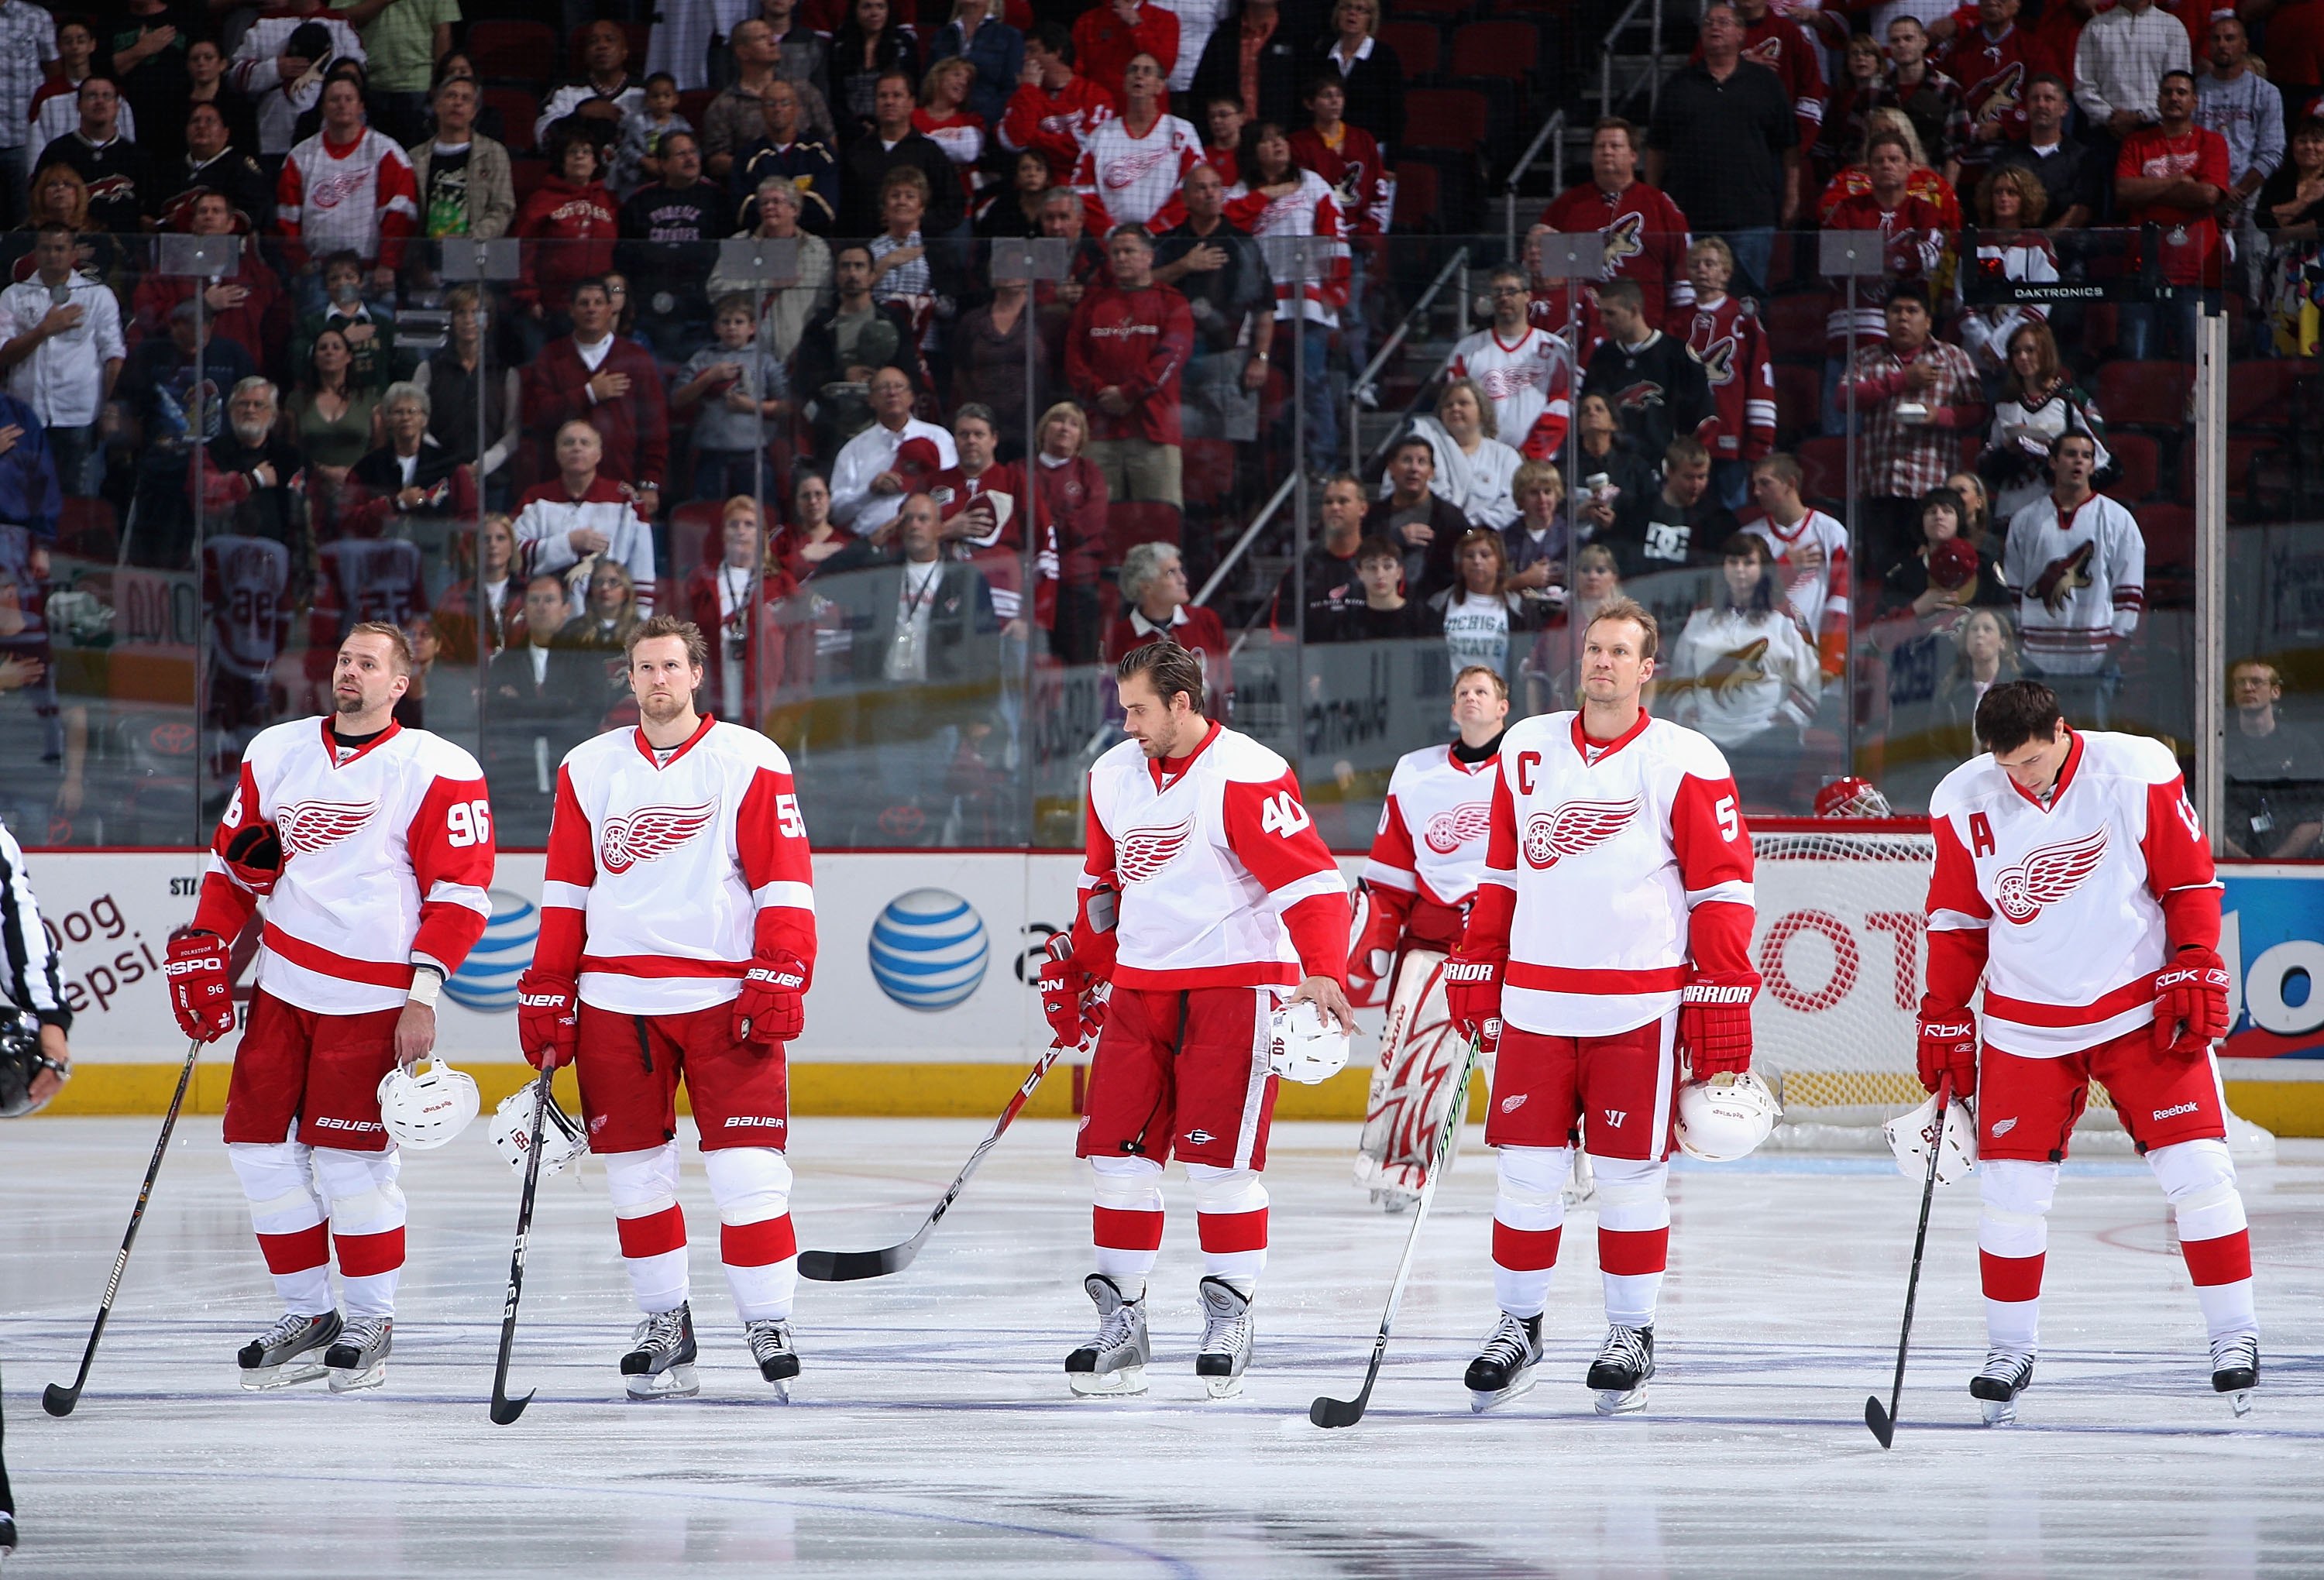 GLENDALE, AZ - OCTOBER 22:  (L-R) Tomas Holmstrom #96, Niklas Kronwall #55, Henrik Zetterberg #40, Chris Osgood #30, Nicklas Lidstrom #5 and Pavel Datsyuk #13 of the Detroit Red Wings stand attended for the National Anthem during the NHL game against the